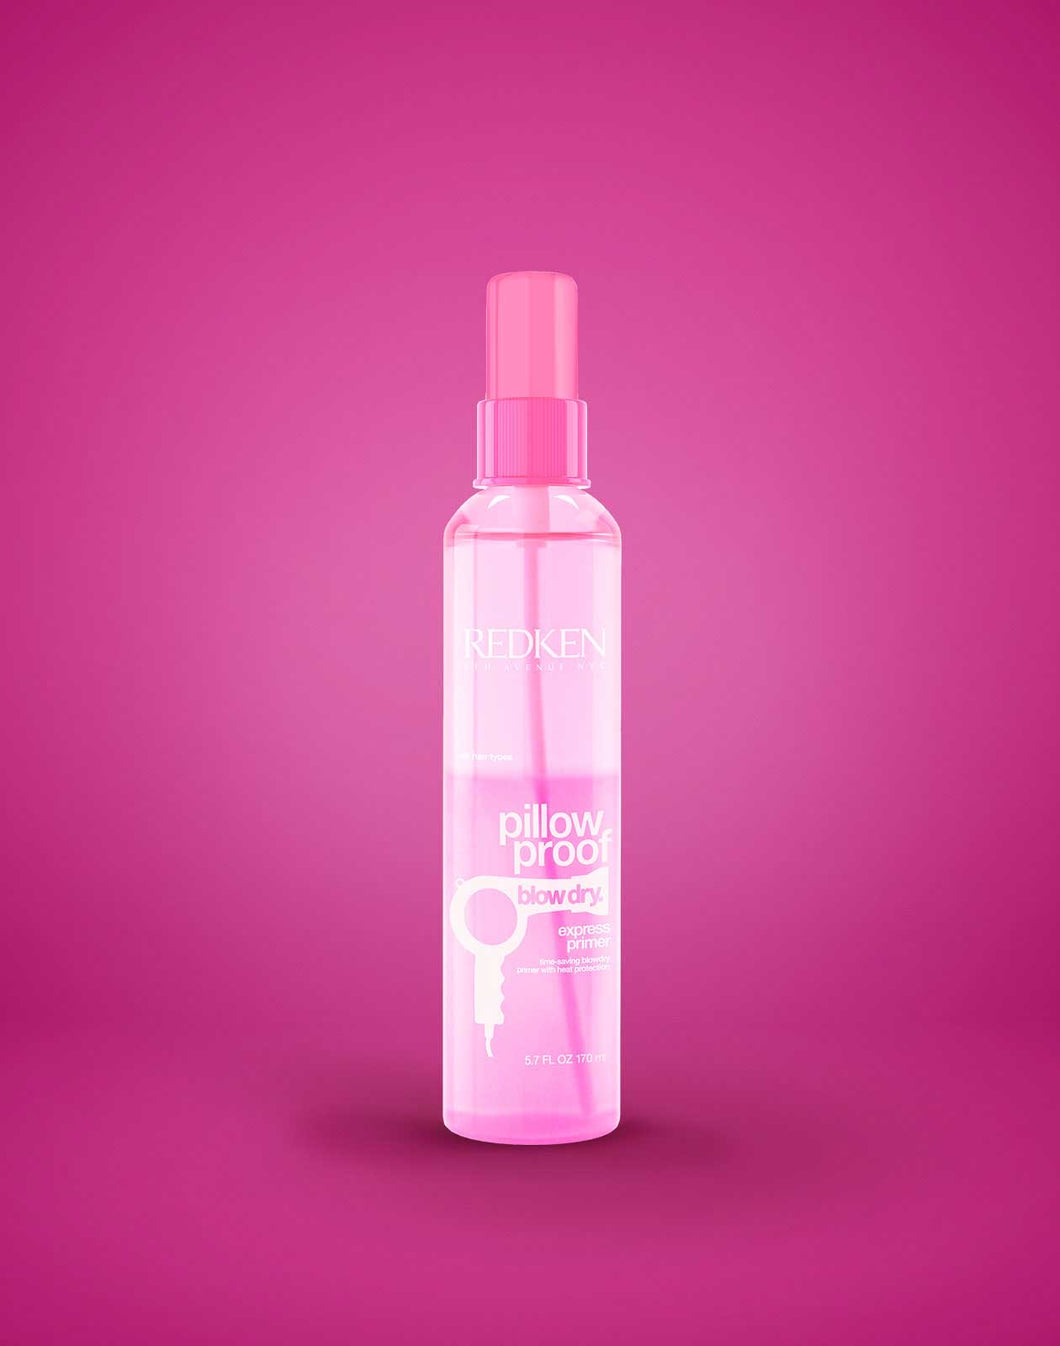 PILLOW PROOF BLOW DRY EXPRESS PRIMER SPRAY